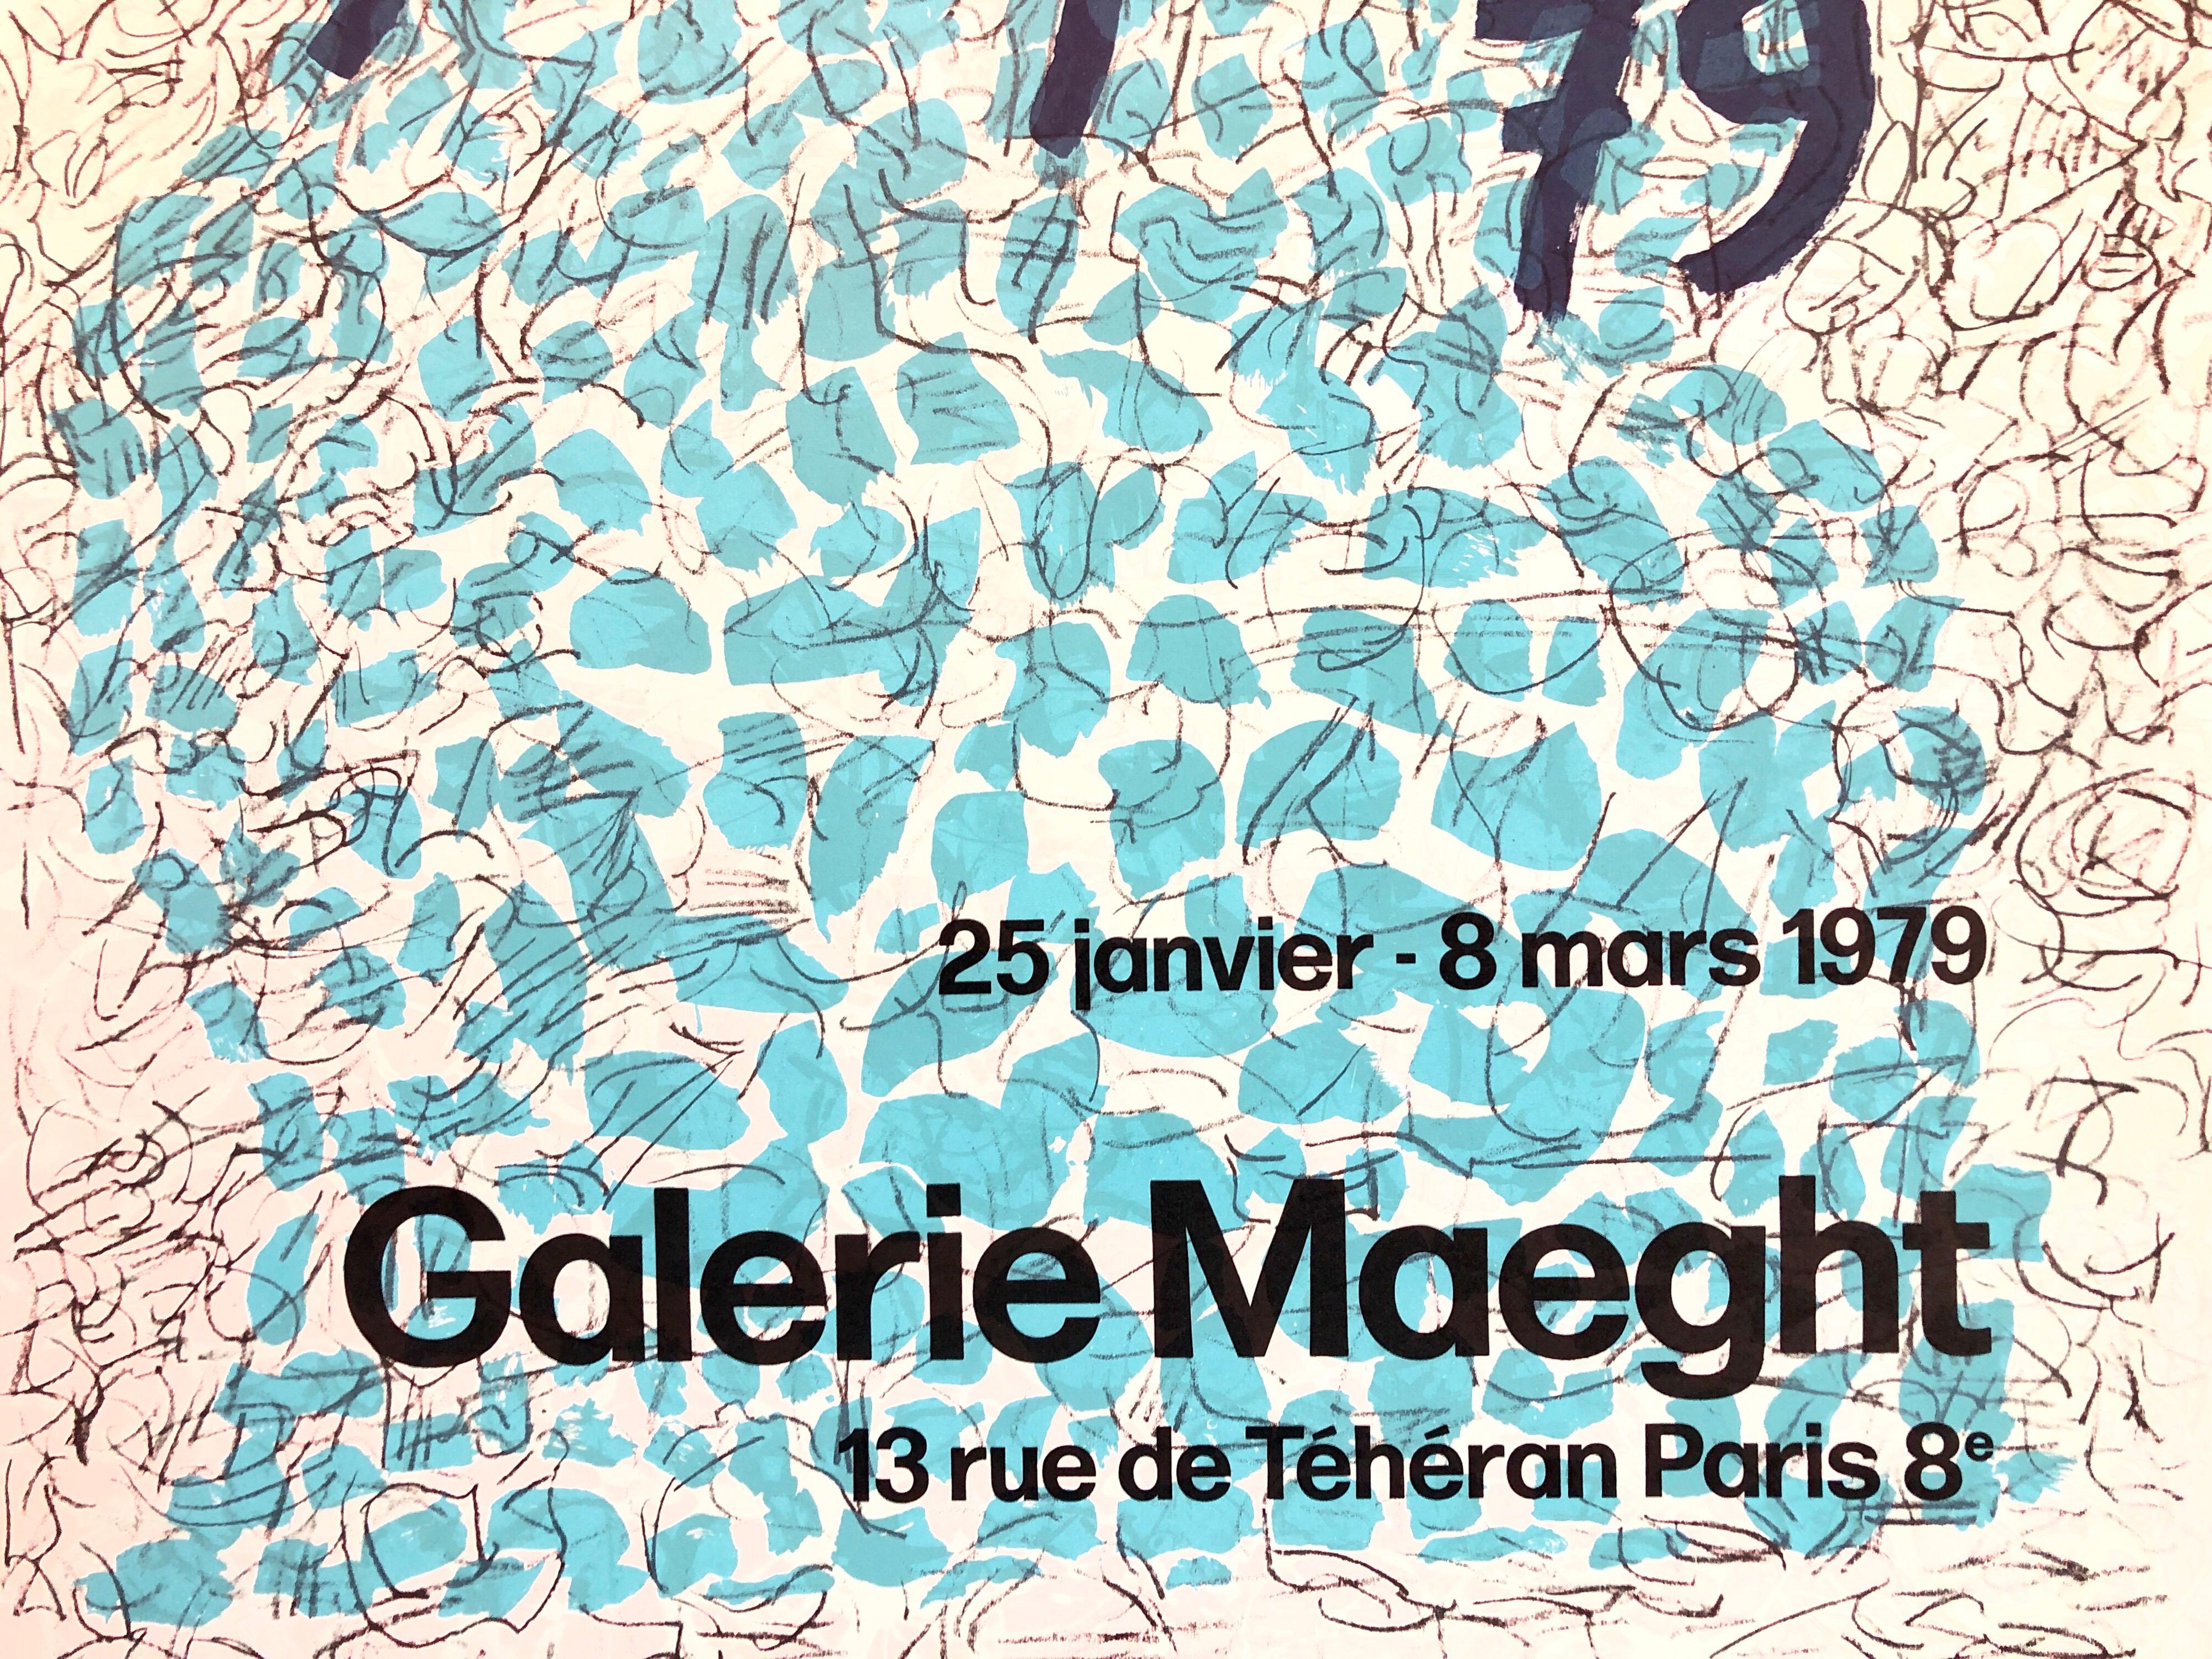 Vintage gallery exhibition poster. 
The Galerie Maeght is a gallery of modern art in Paris, France, and Barcelona, Catalonia, Spain. The gallery was founded in 1936 in Cannes. The Paris gallery was started in 1946 by Aimé Maeght. The artists